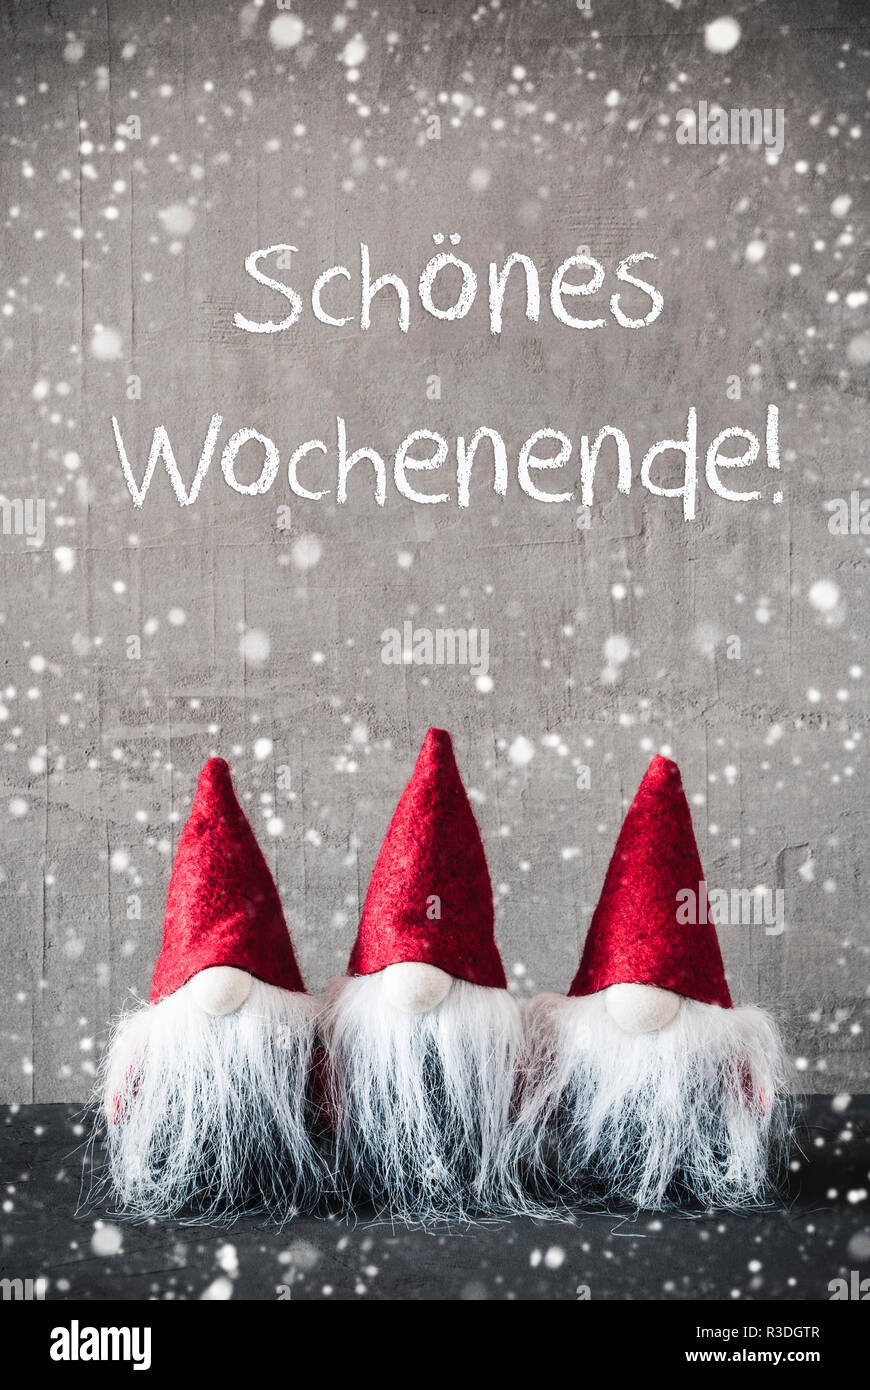 Three Gray Gnomes With German Text Schoenes Wochenende Means Happy Weekend And Red Jelly Bag Cap. Urban Cement Background With Snowflakes. Vertical Fo Stock Photo